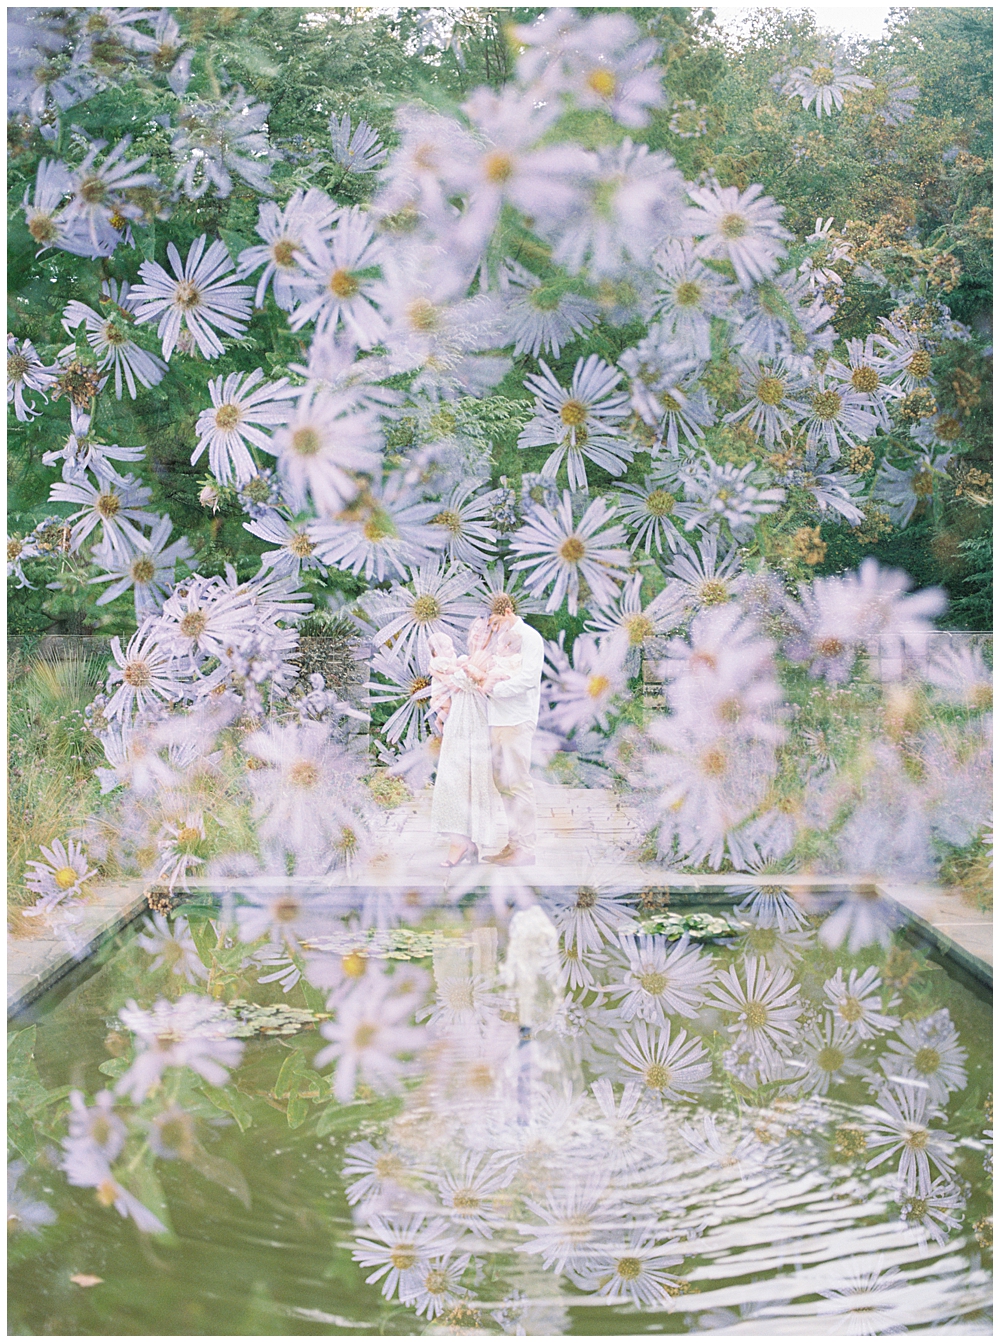 A double exposure of a family in a garden with purple flowers